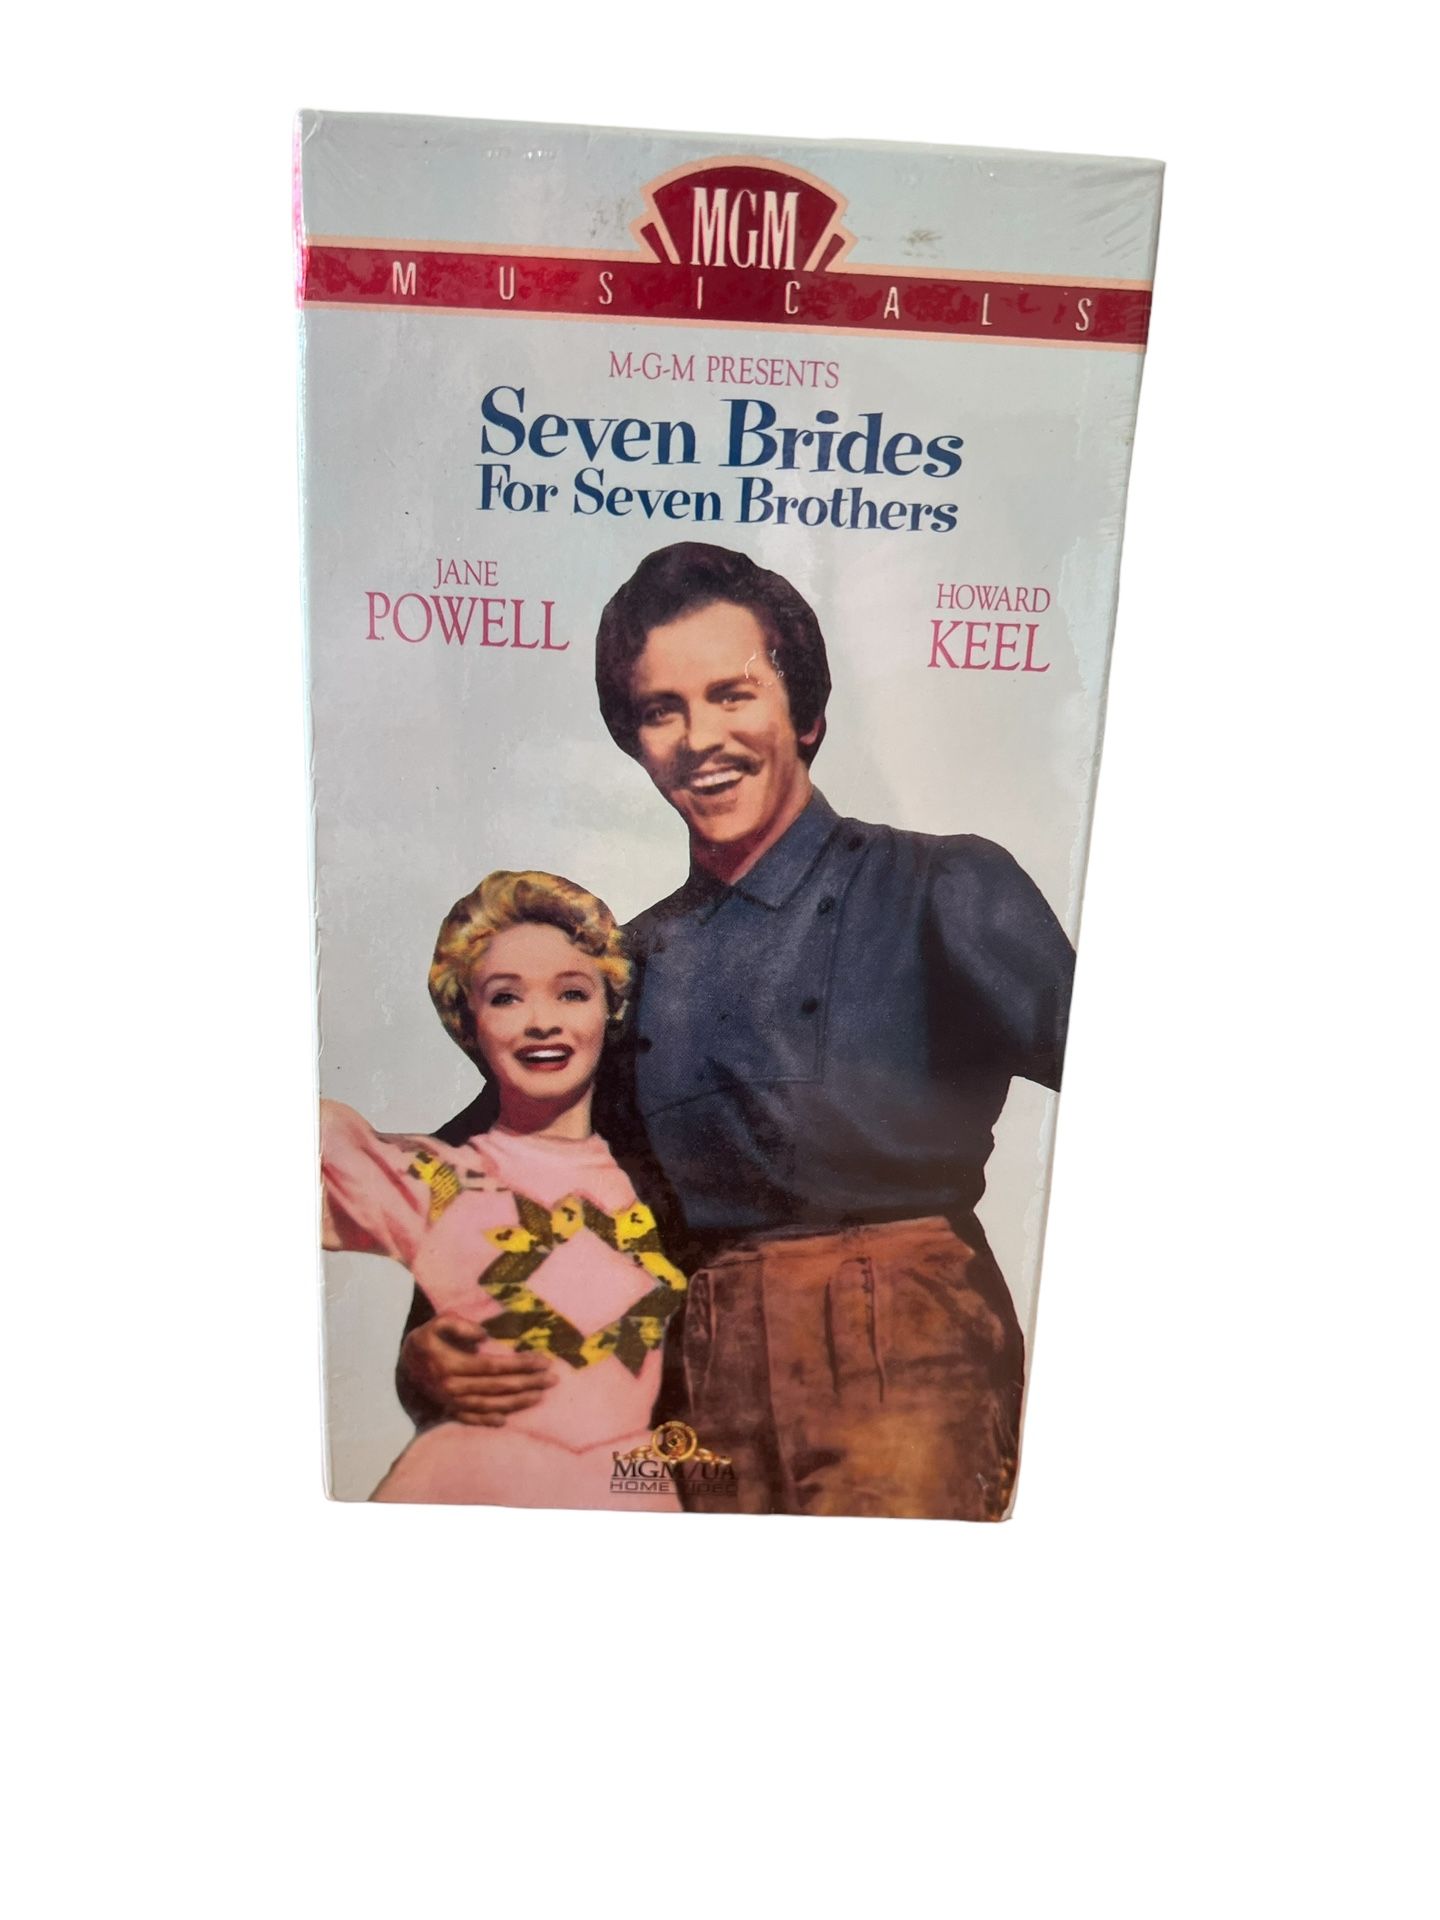 Seven Brides for Seven Brothers (VHS, 1998) Rated G Metro Goldwyn Mayer  This classic musical VHS tape features the beloved film "Seven Brides for Sev